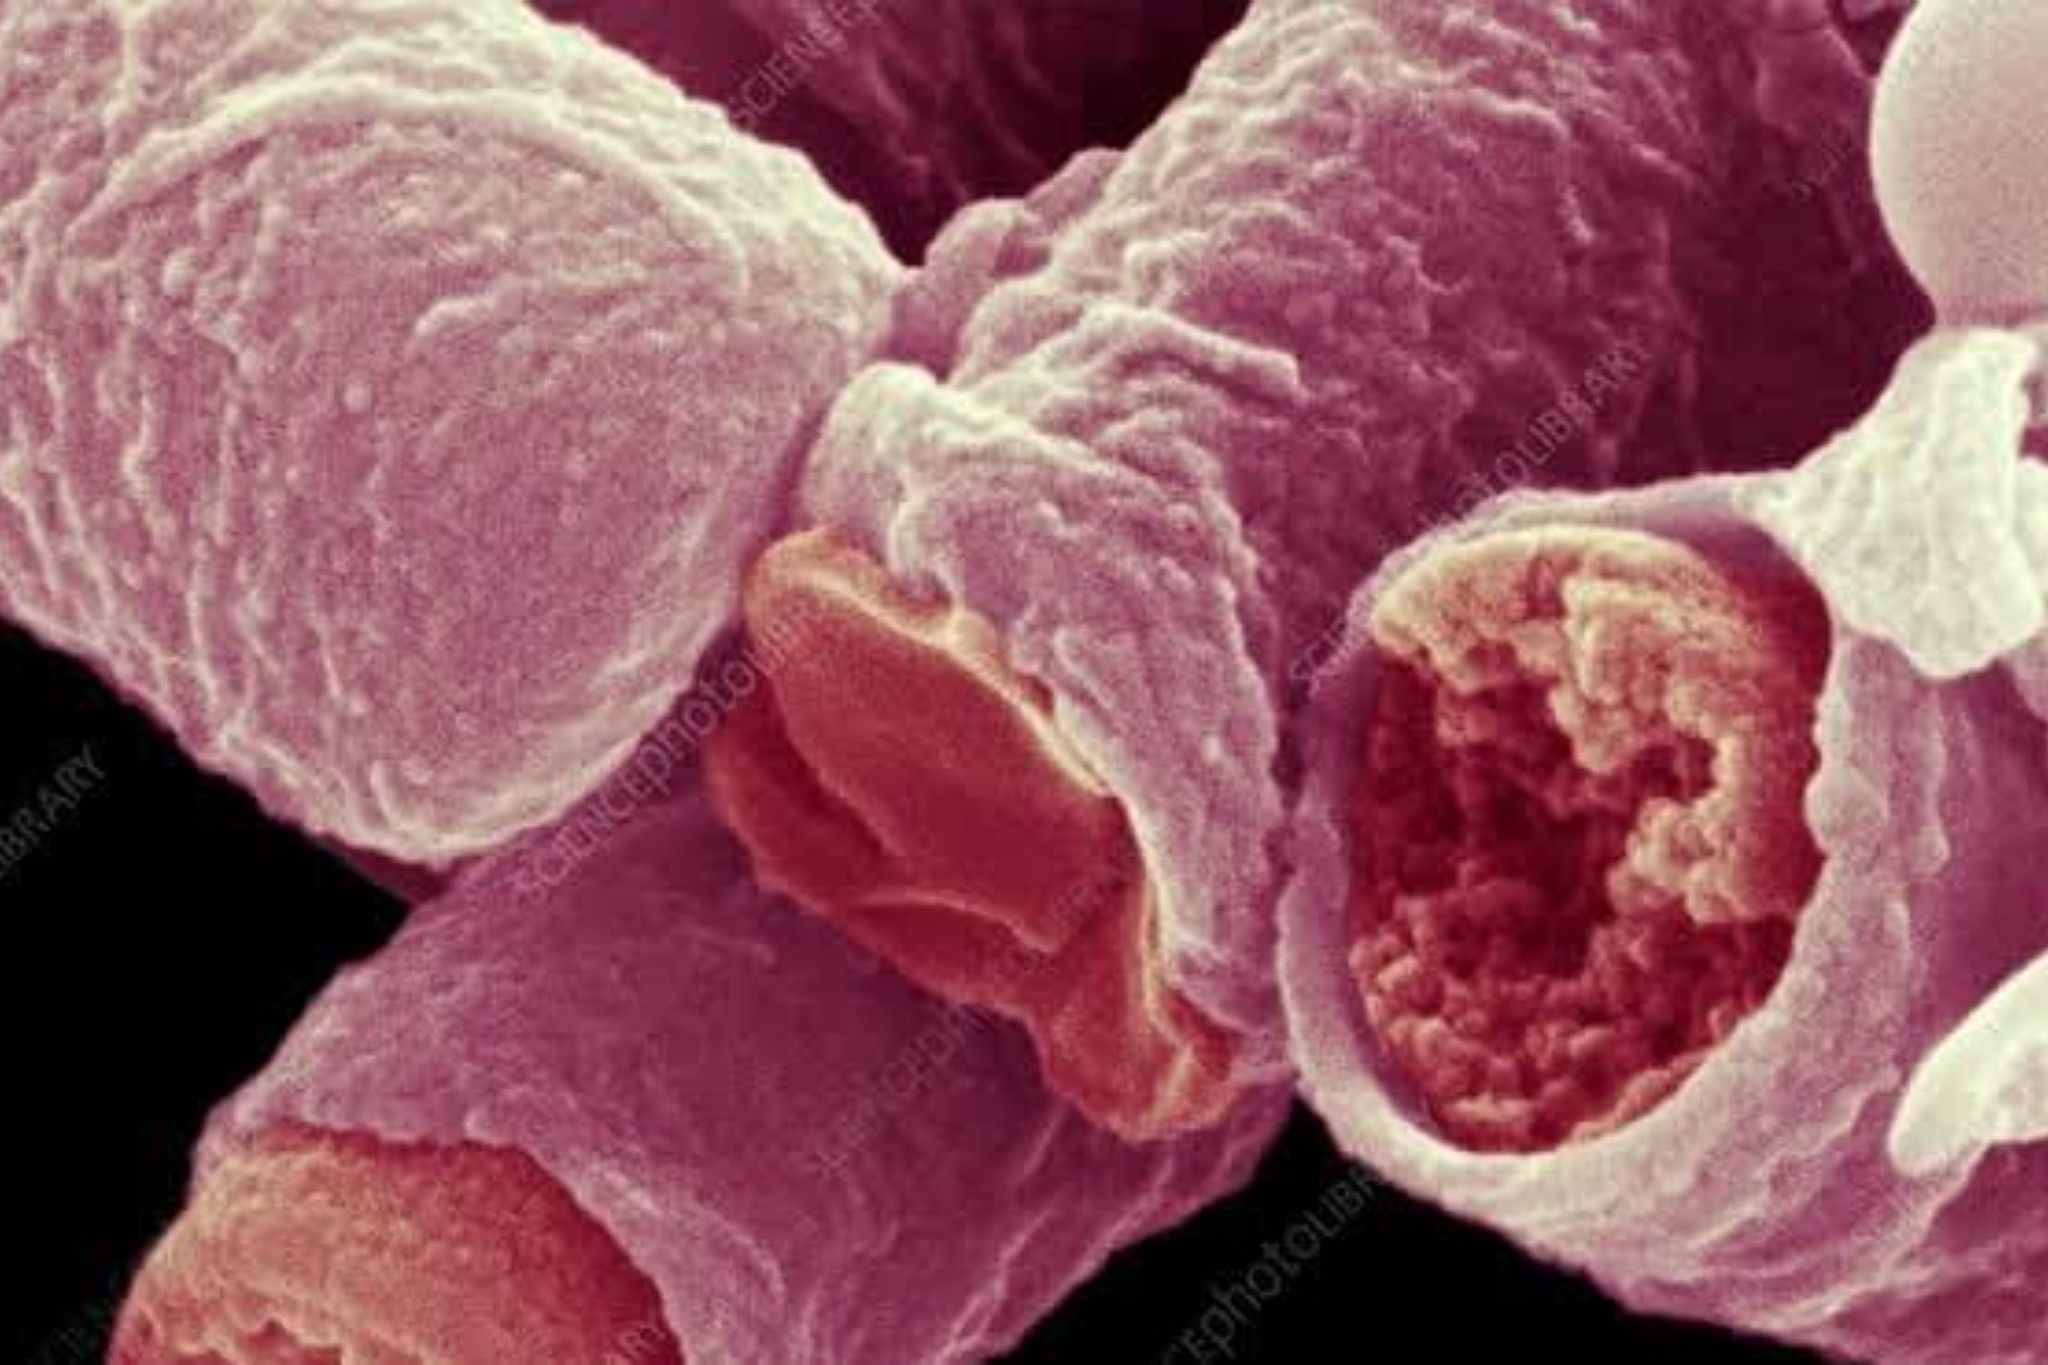 Sierra Leone Government Releases Public Health Information About Anthrax